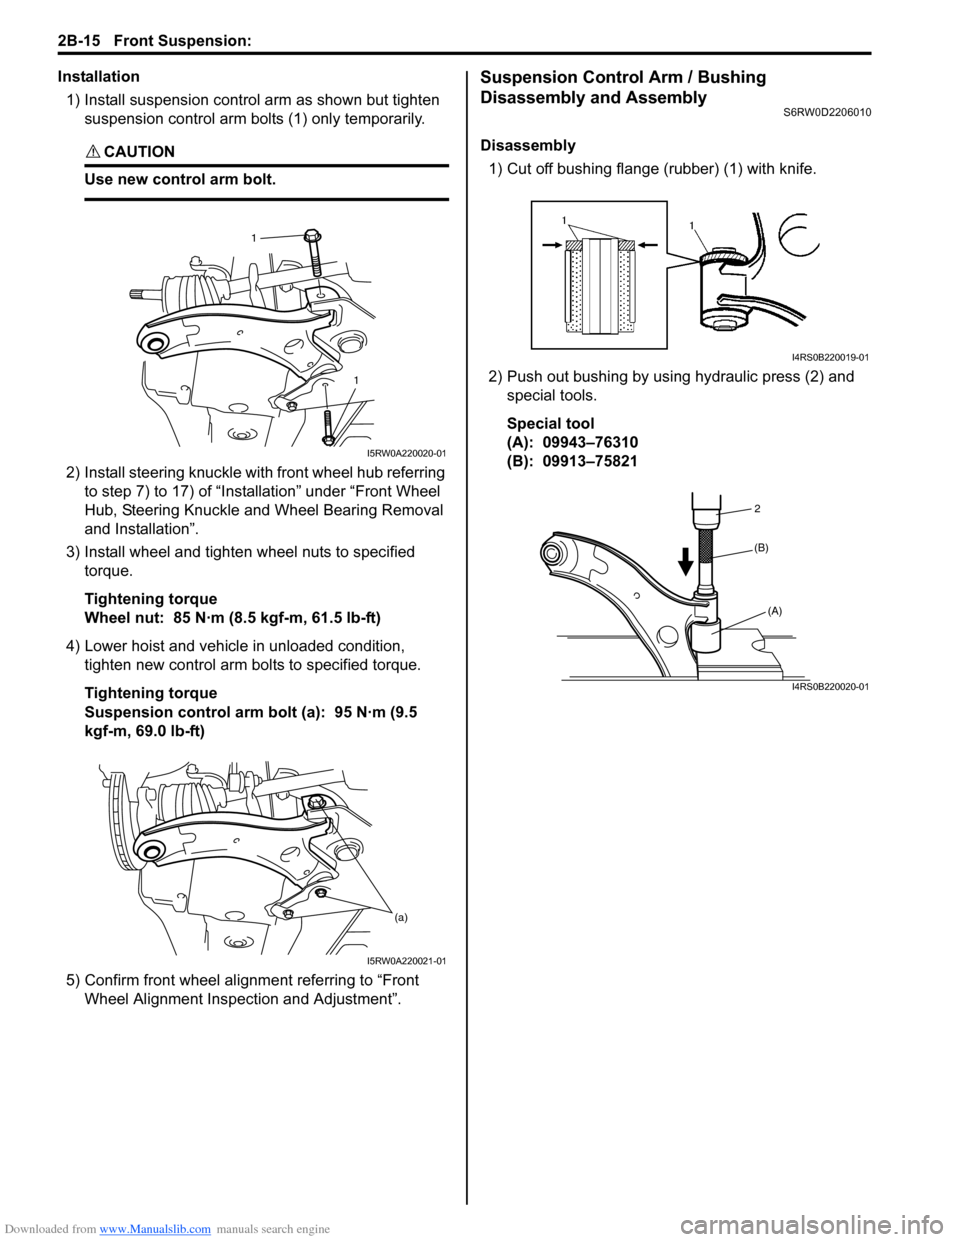 SUZUKI SX4 2006 1.G Service Workshop Manual Downloaded from www.Manualslib.com manuals search engine 2B-15 Front Suspension: 
Installation
1) Install suspension control arm as shown but tighten 
suspension control arm bolts (1) only temporarily